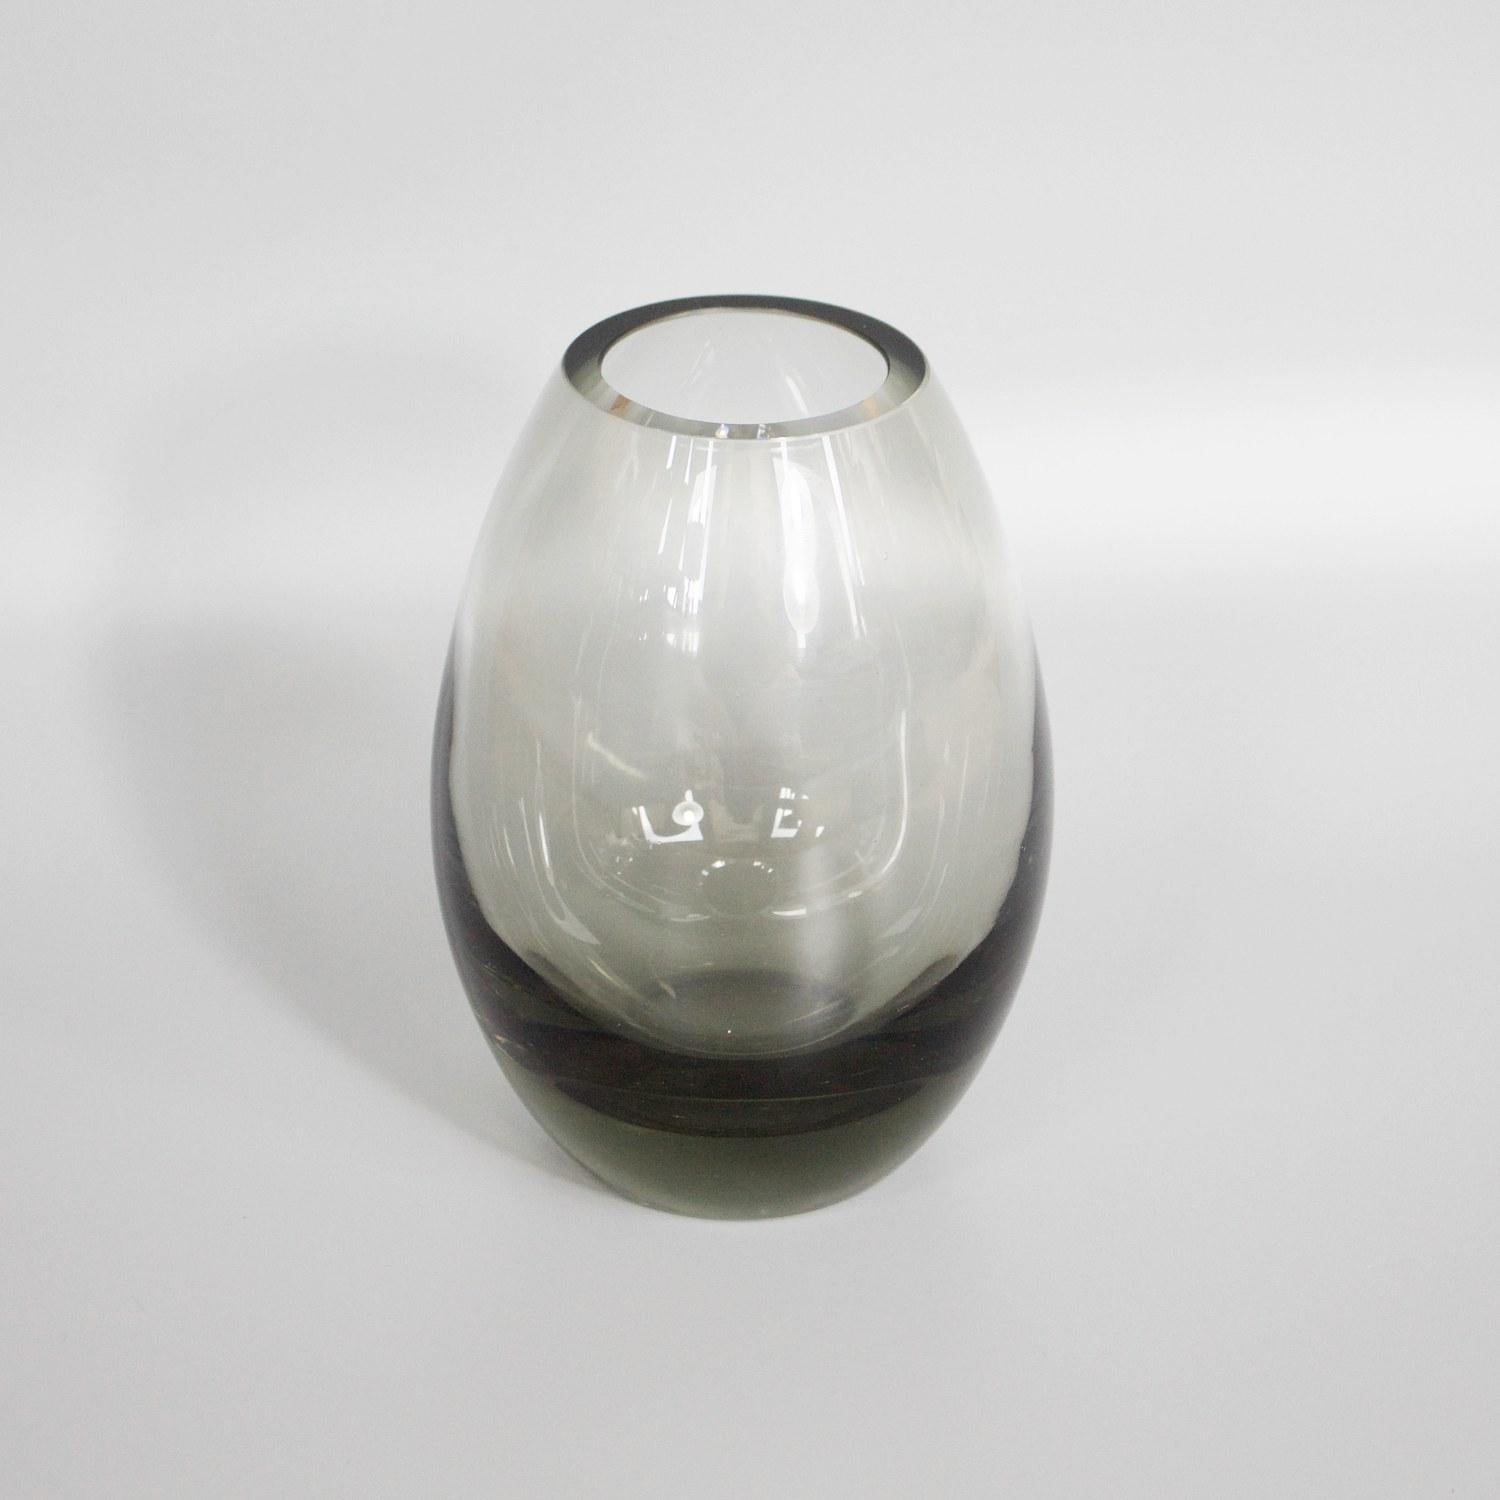 Mid-20th Century Danish Glass Vase by Per Lütken for Holmegaard Glassworks Signed and Dated 1961